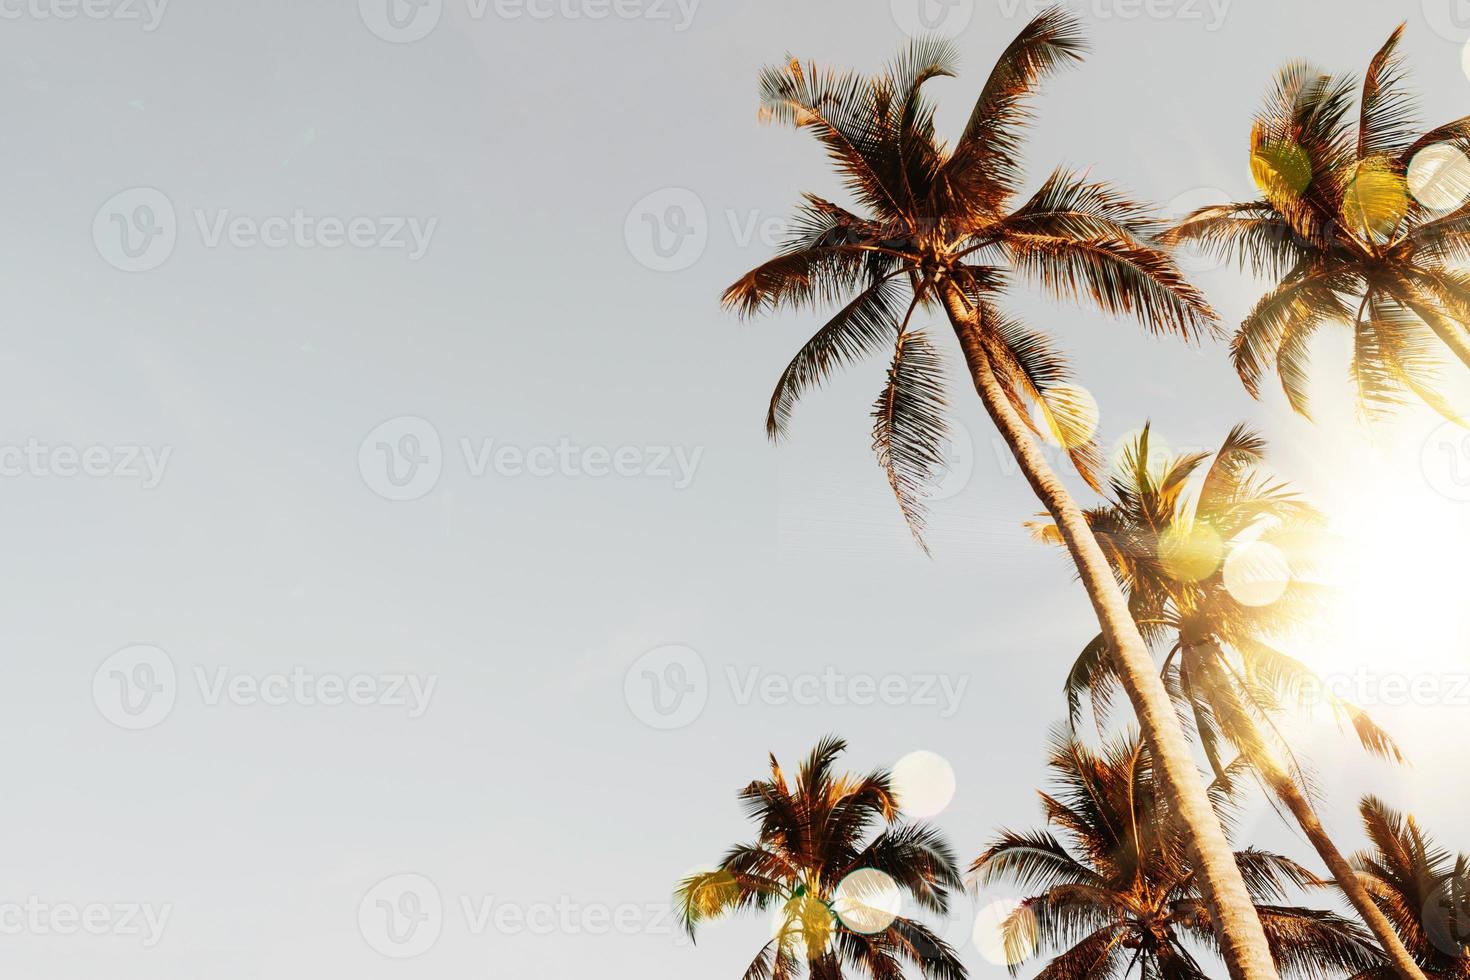 Tropical palm coconut trees on sunset sky flare photo